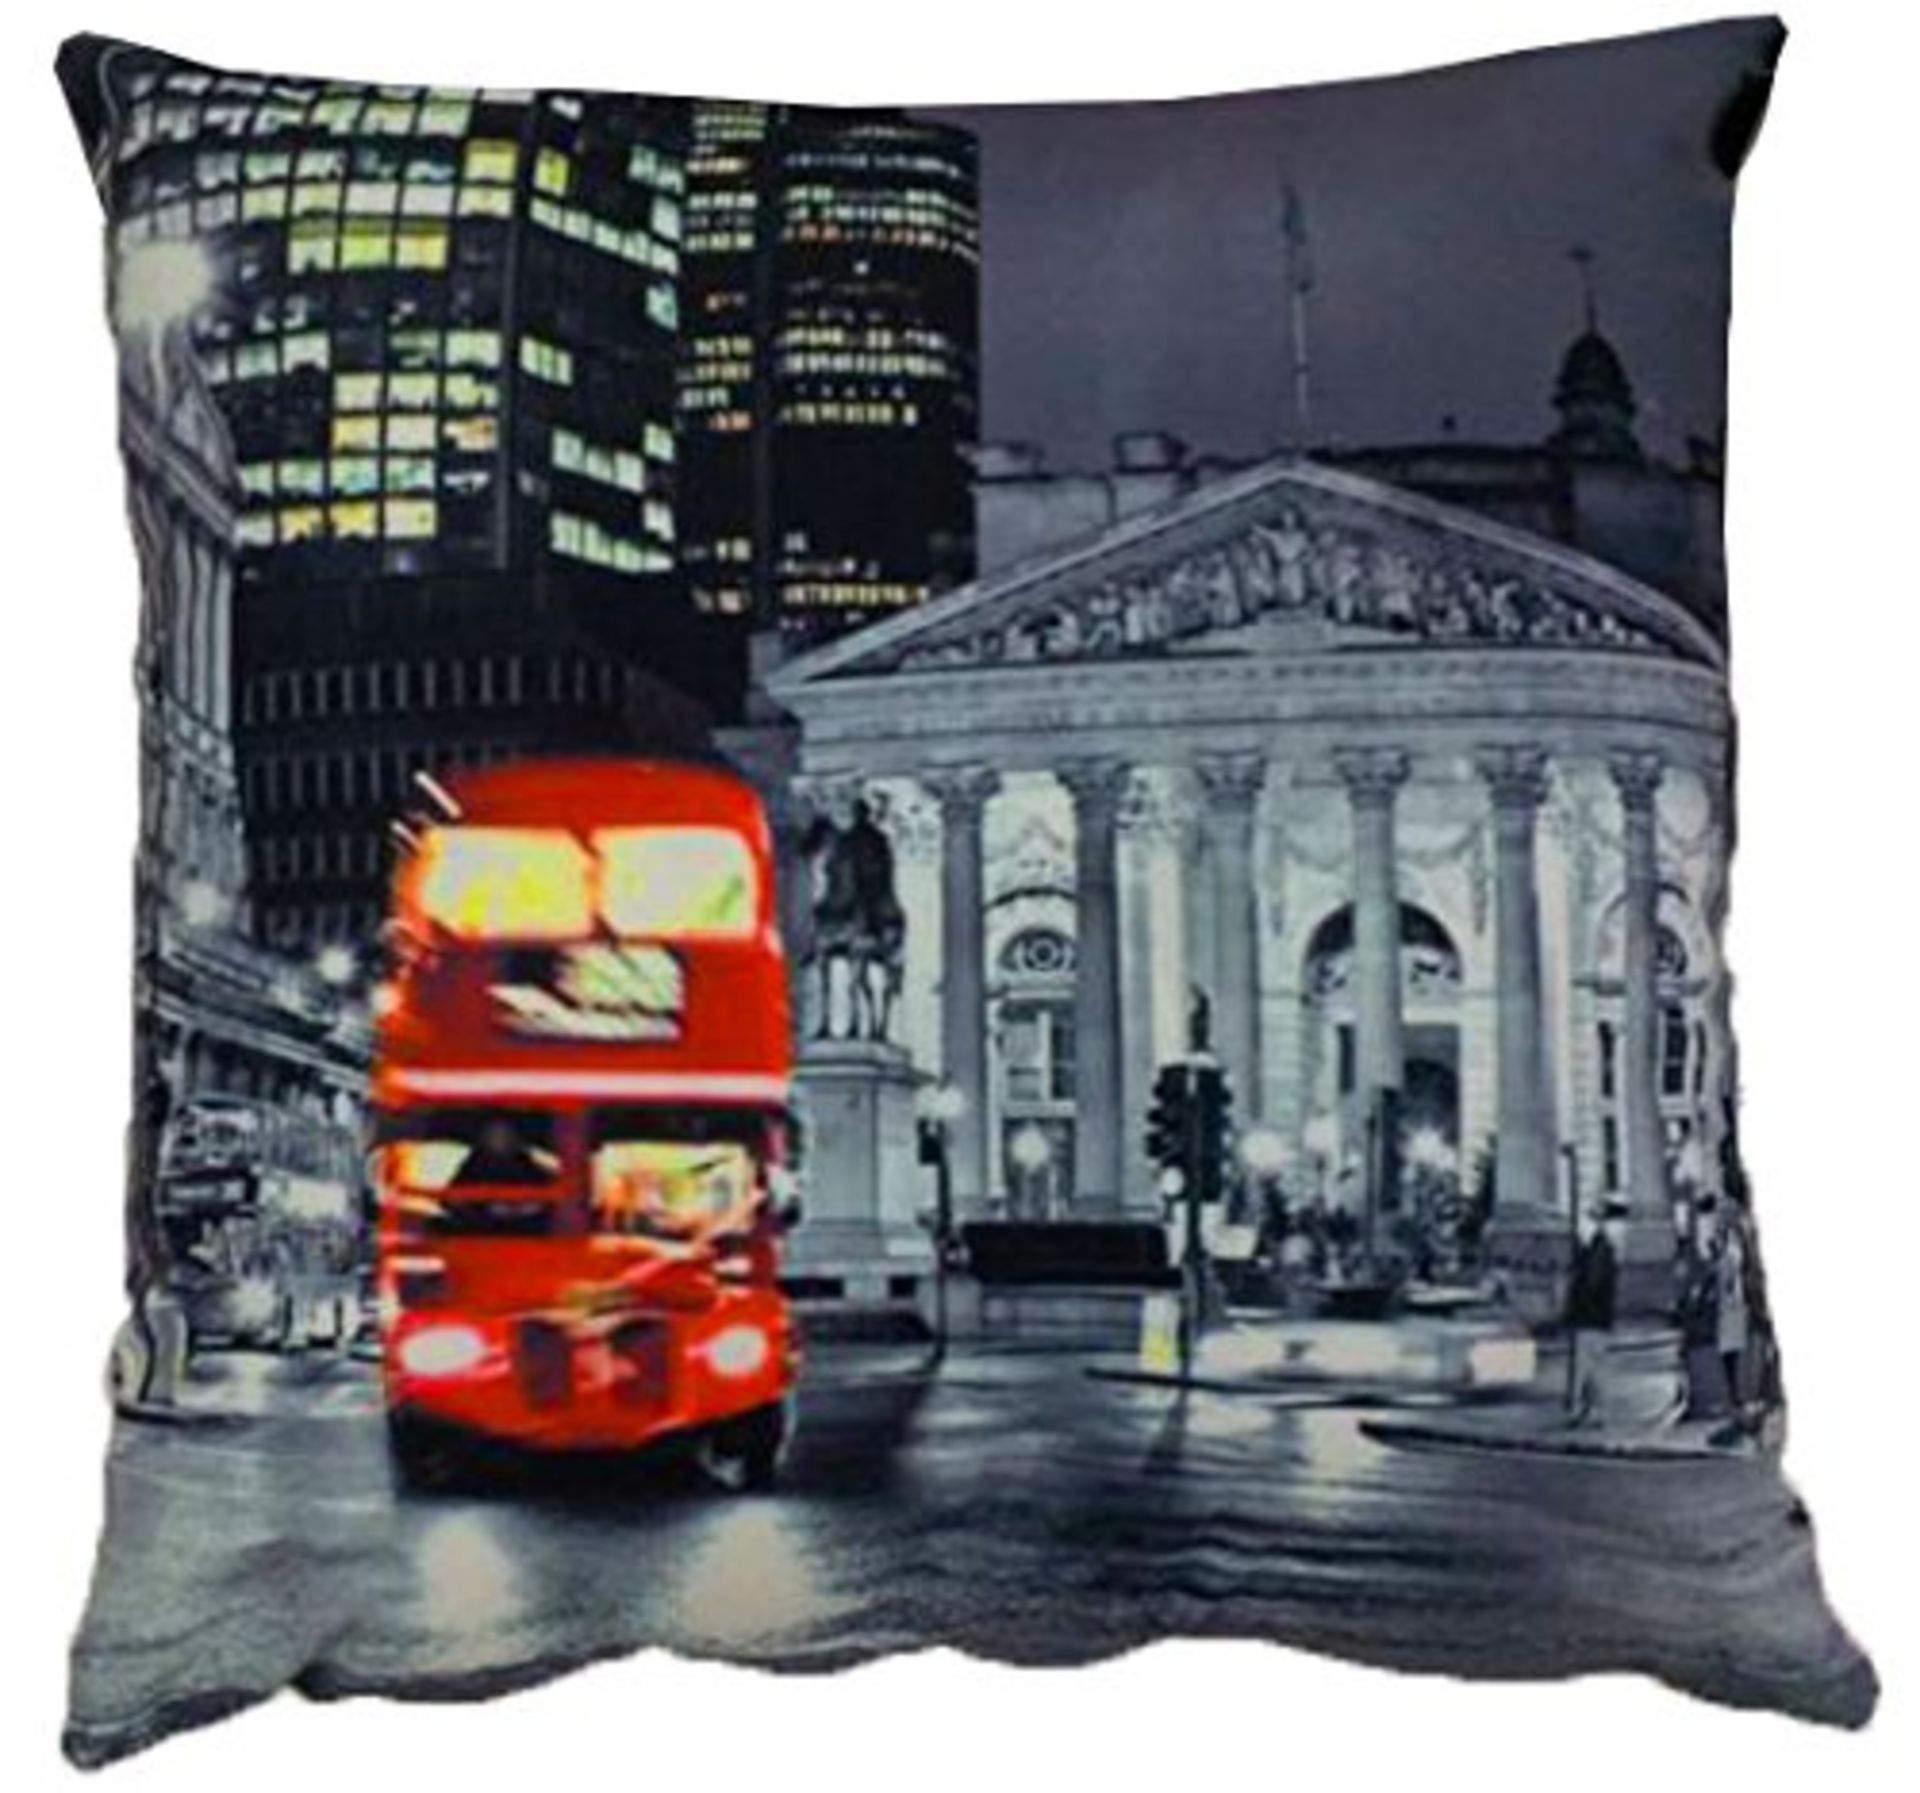 V Brand New Soft Faux Suede Cushion With Printed Picture Of London Routemaster Bus & Museum X 2